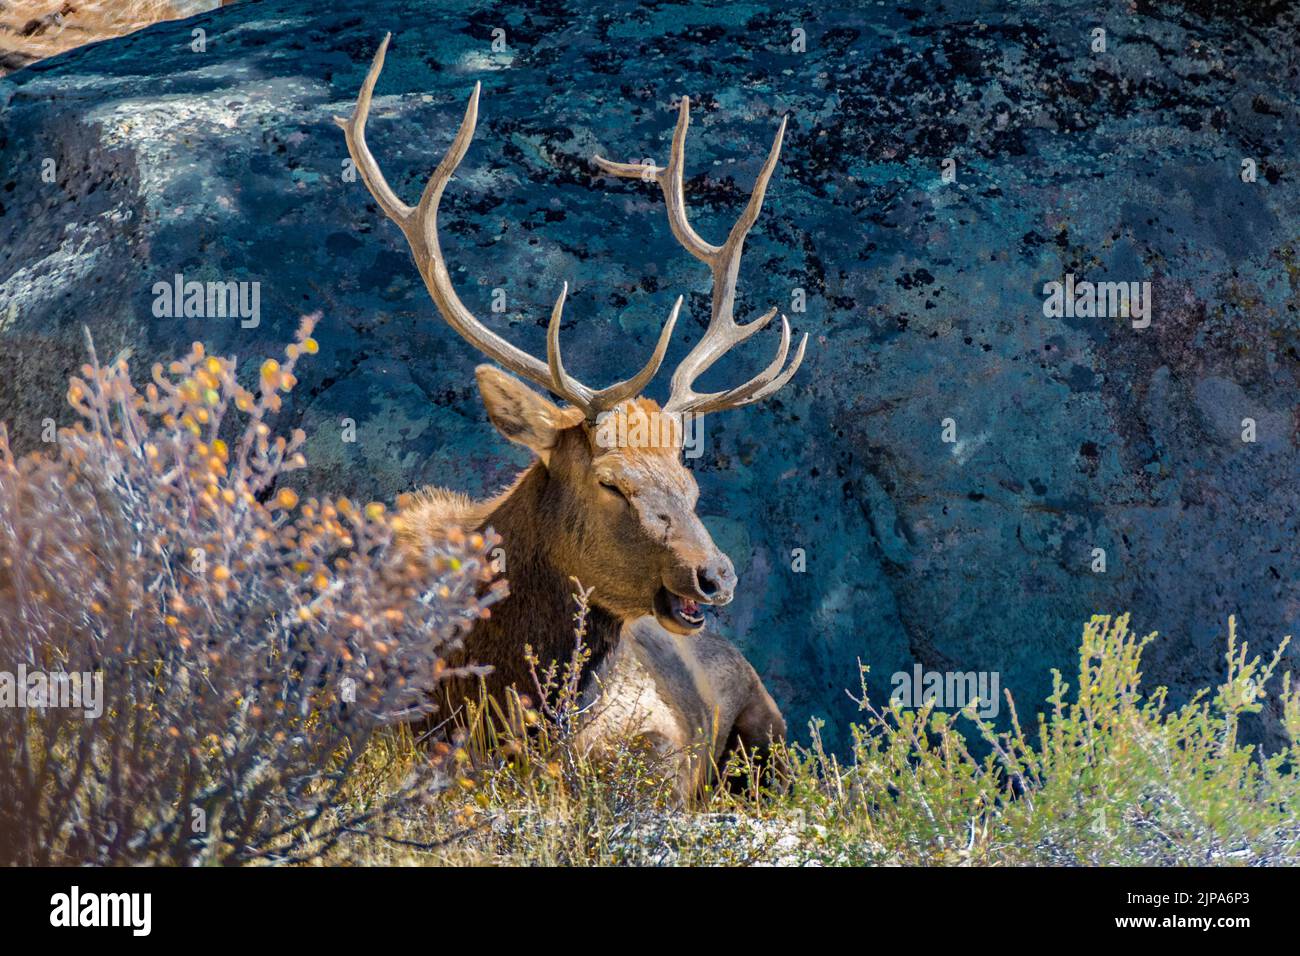 Bull Rocky Mountain Elk, Cervus canadensis, seated with mouth open in Rocky Mountain National Park, Colorado, United States Stock Photo